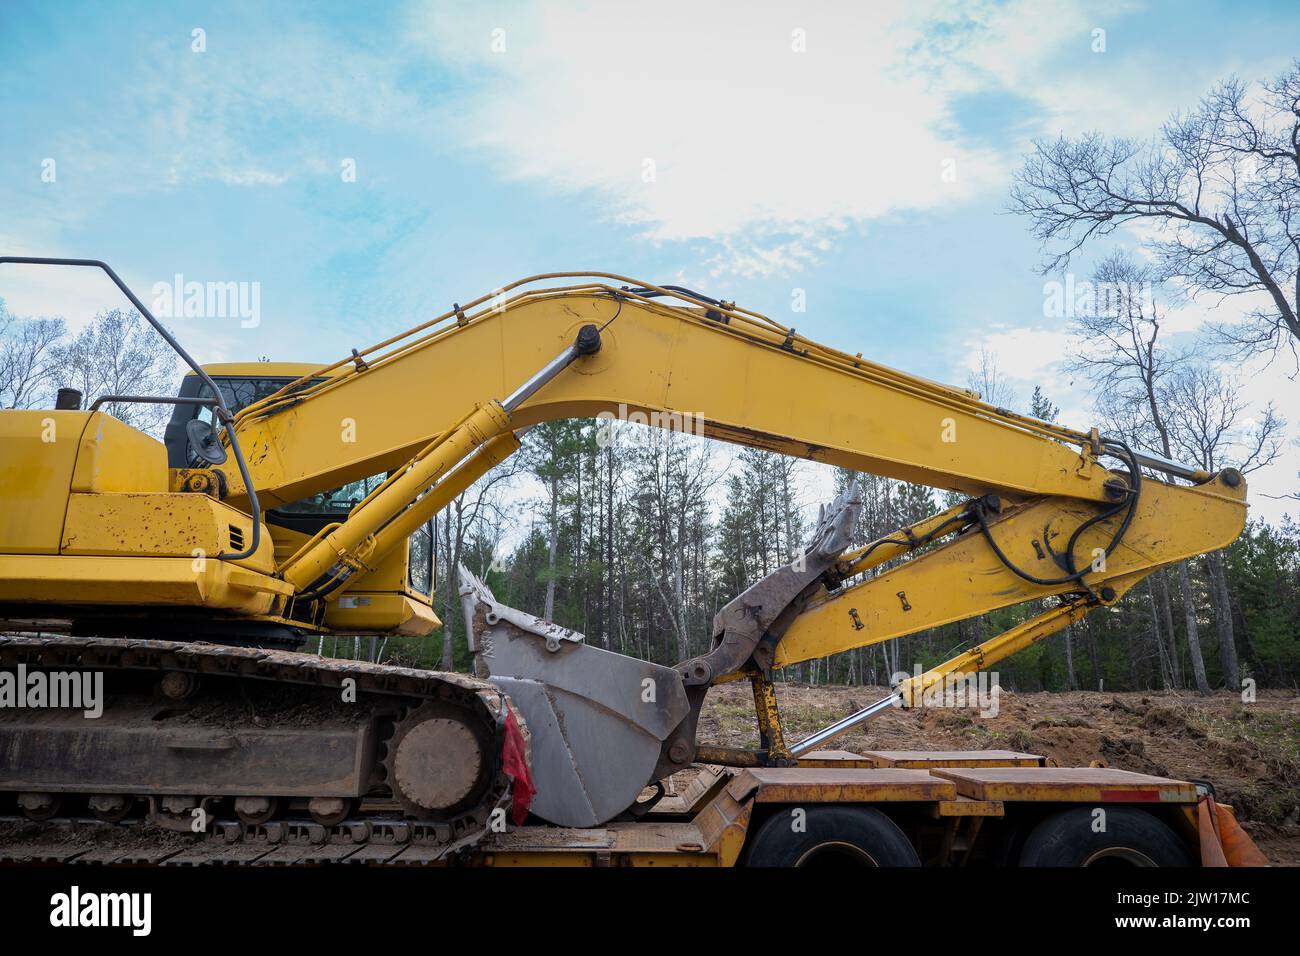 Boom and Bucket of a yellow Skid Steer Excavator Loader on a flat bed trailer, at a construction job site, in evening light with trees in background. Stock Photo